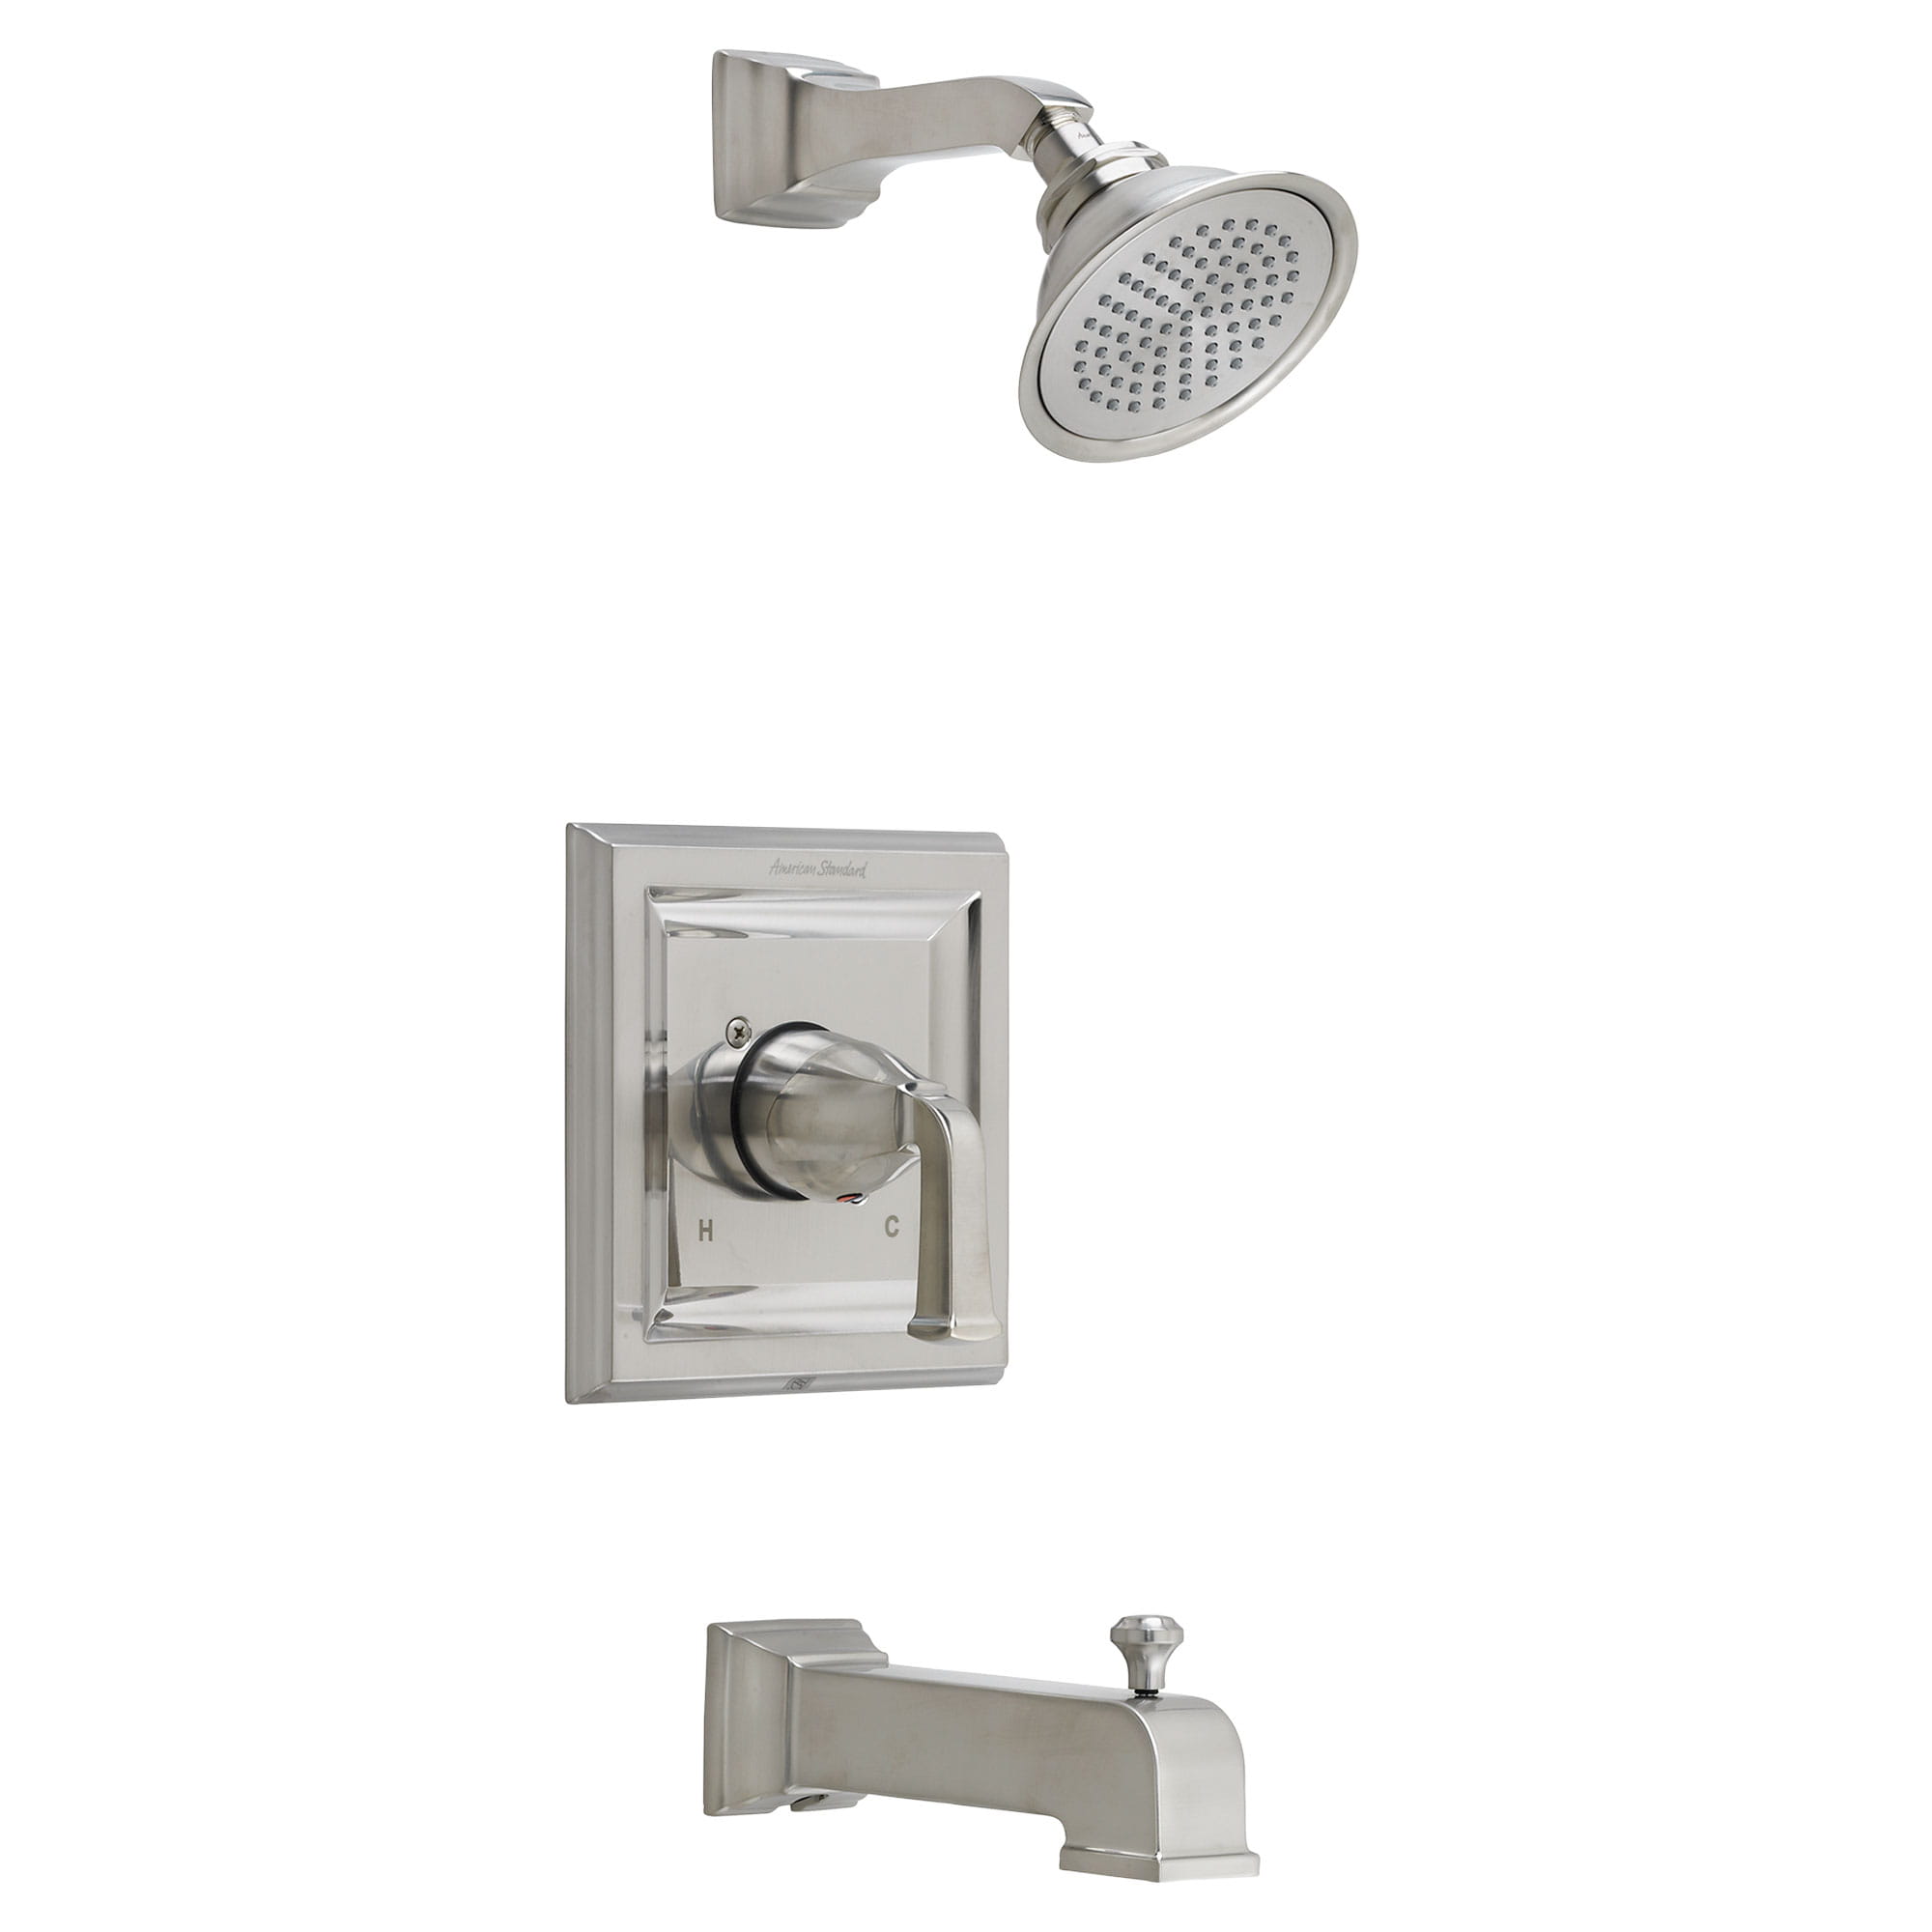 Town Square 2.5 GPM Tub and Shower Trim Kit with Rain Showerhead and Lever Handle